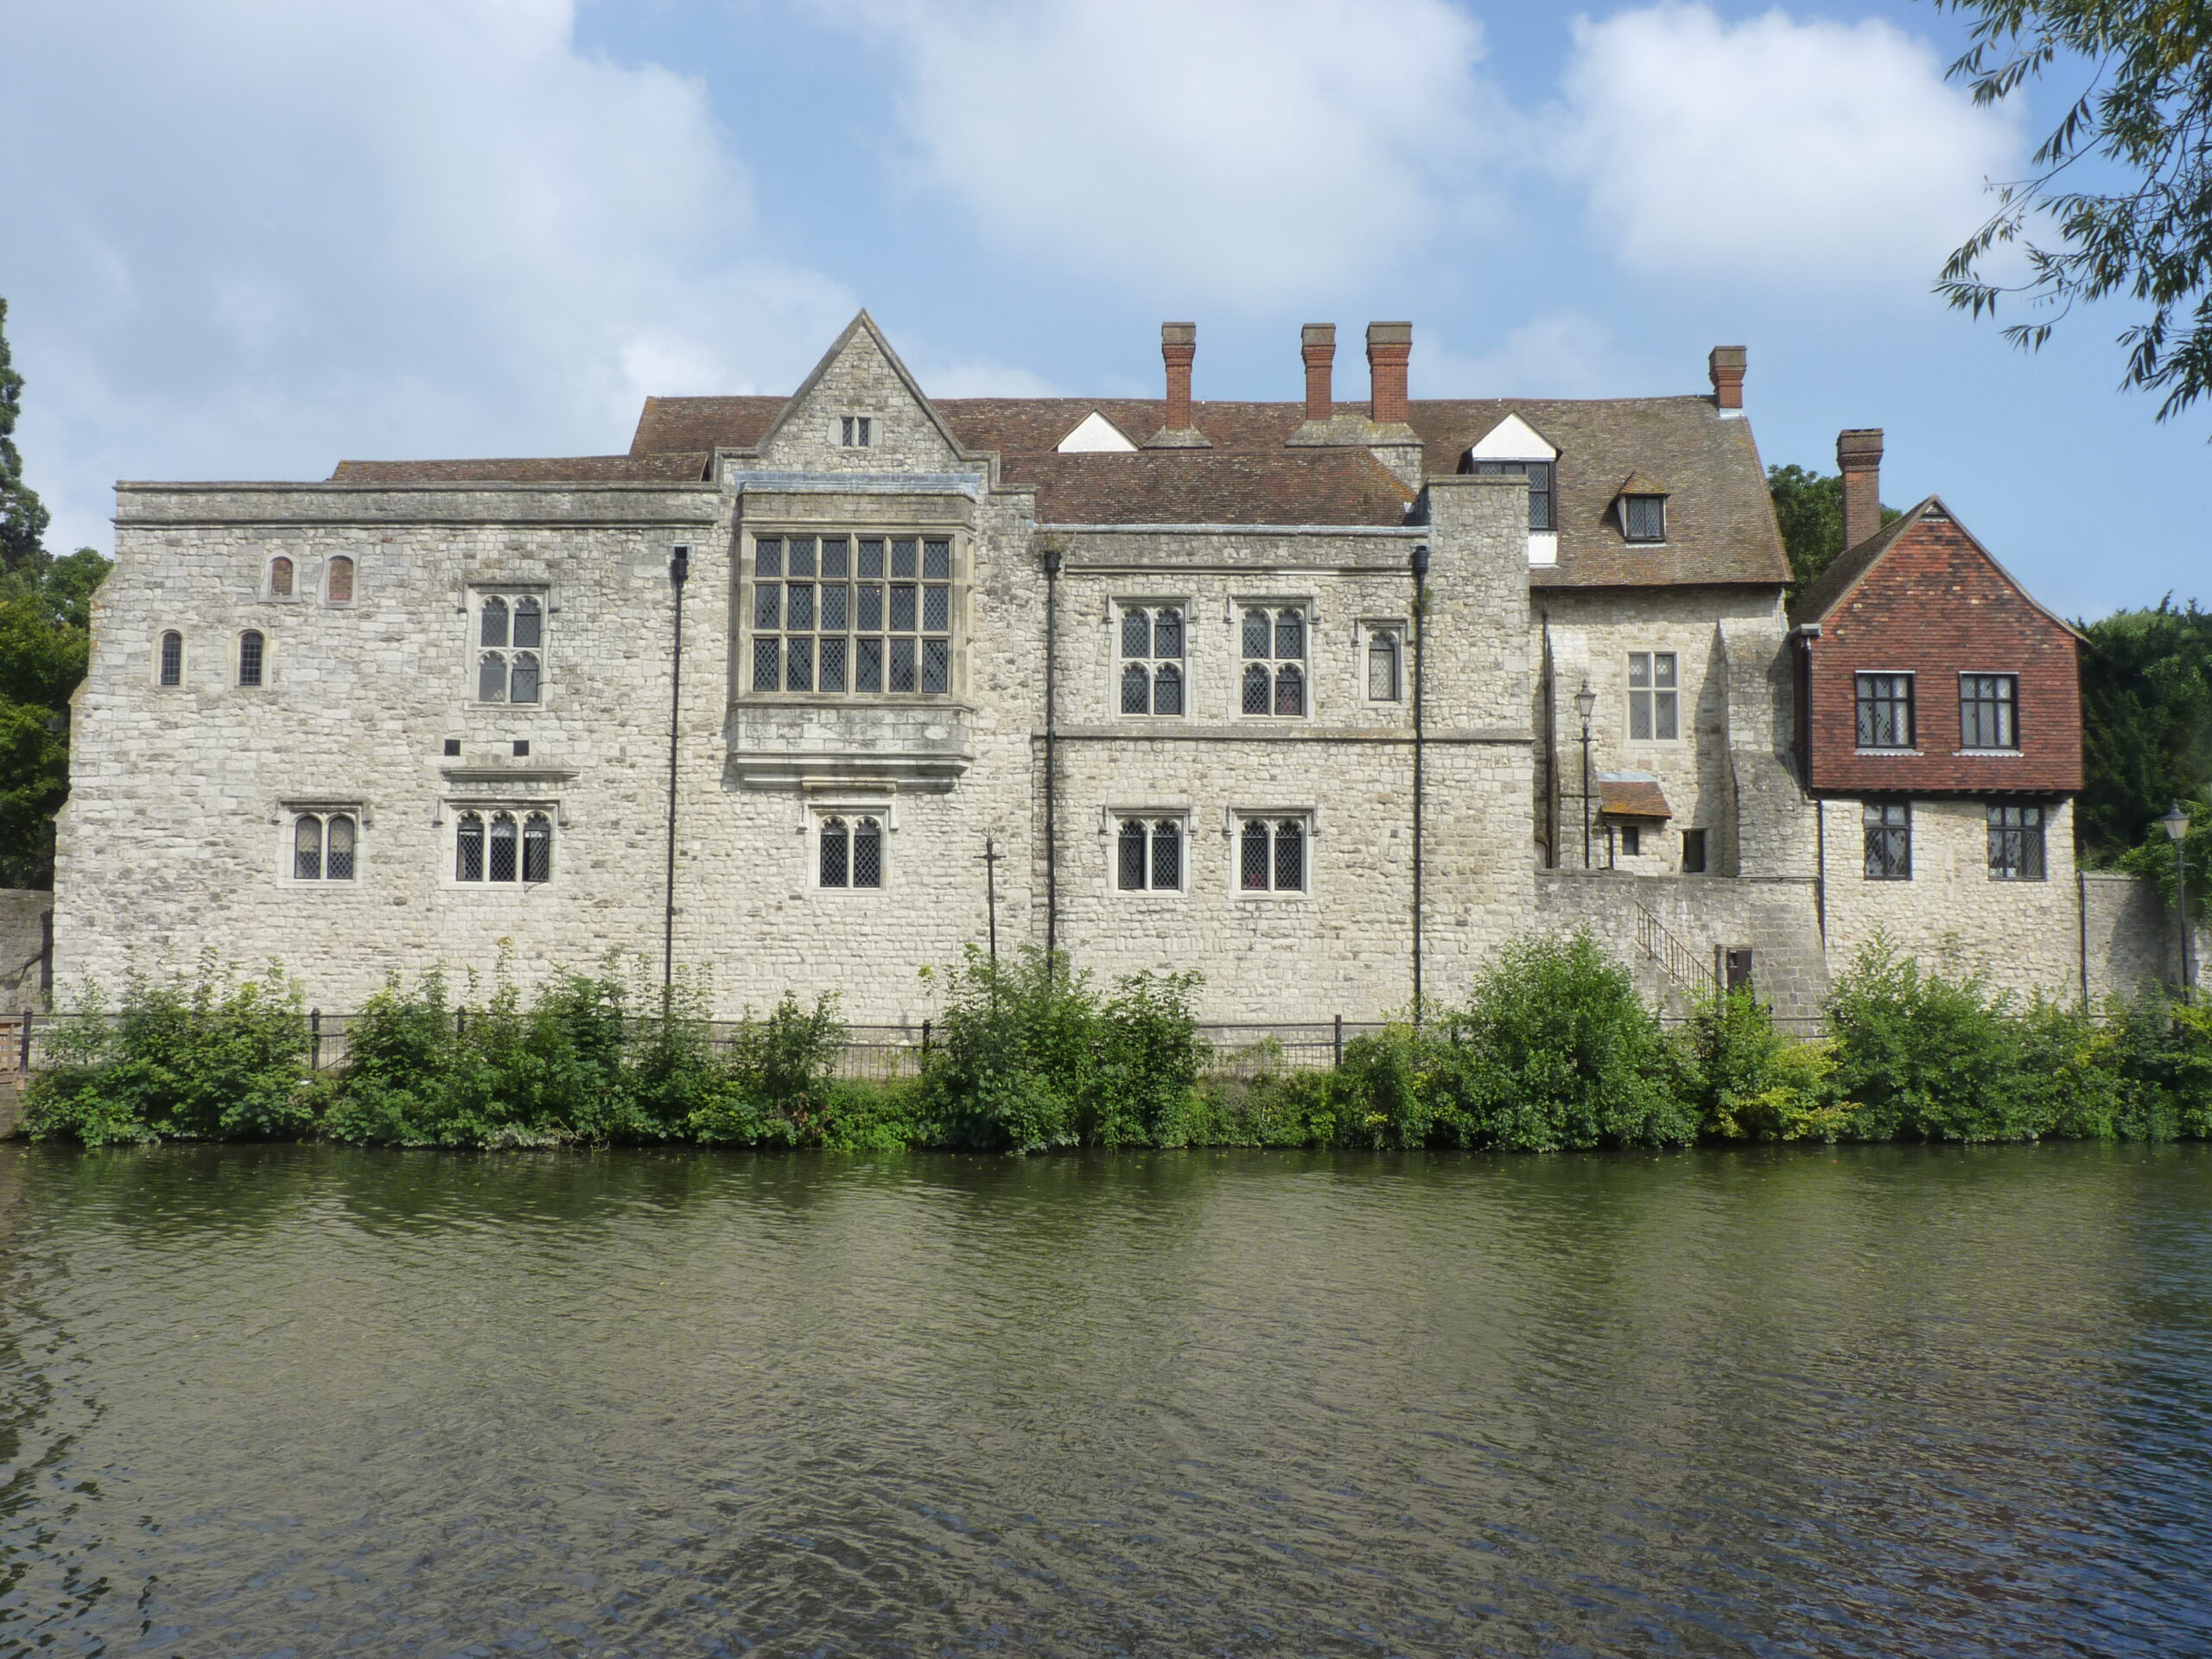 The Archbishops Palace in Maidstone